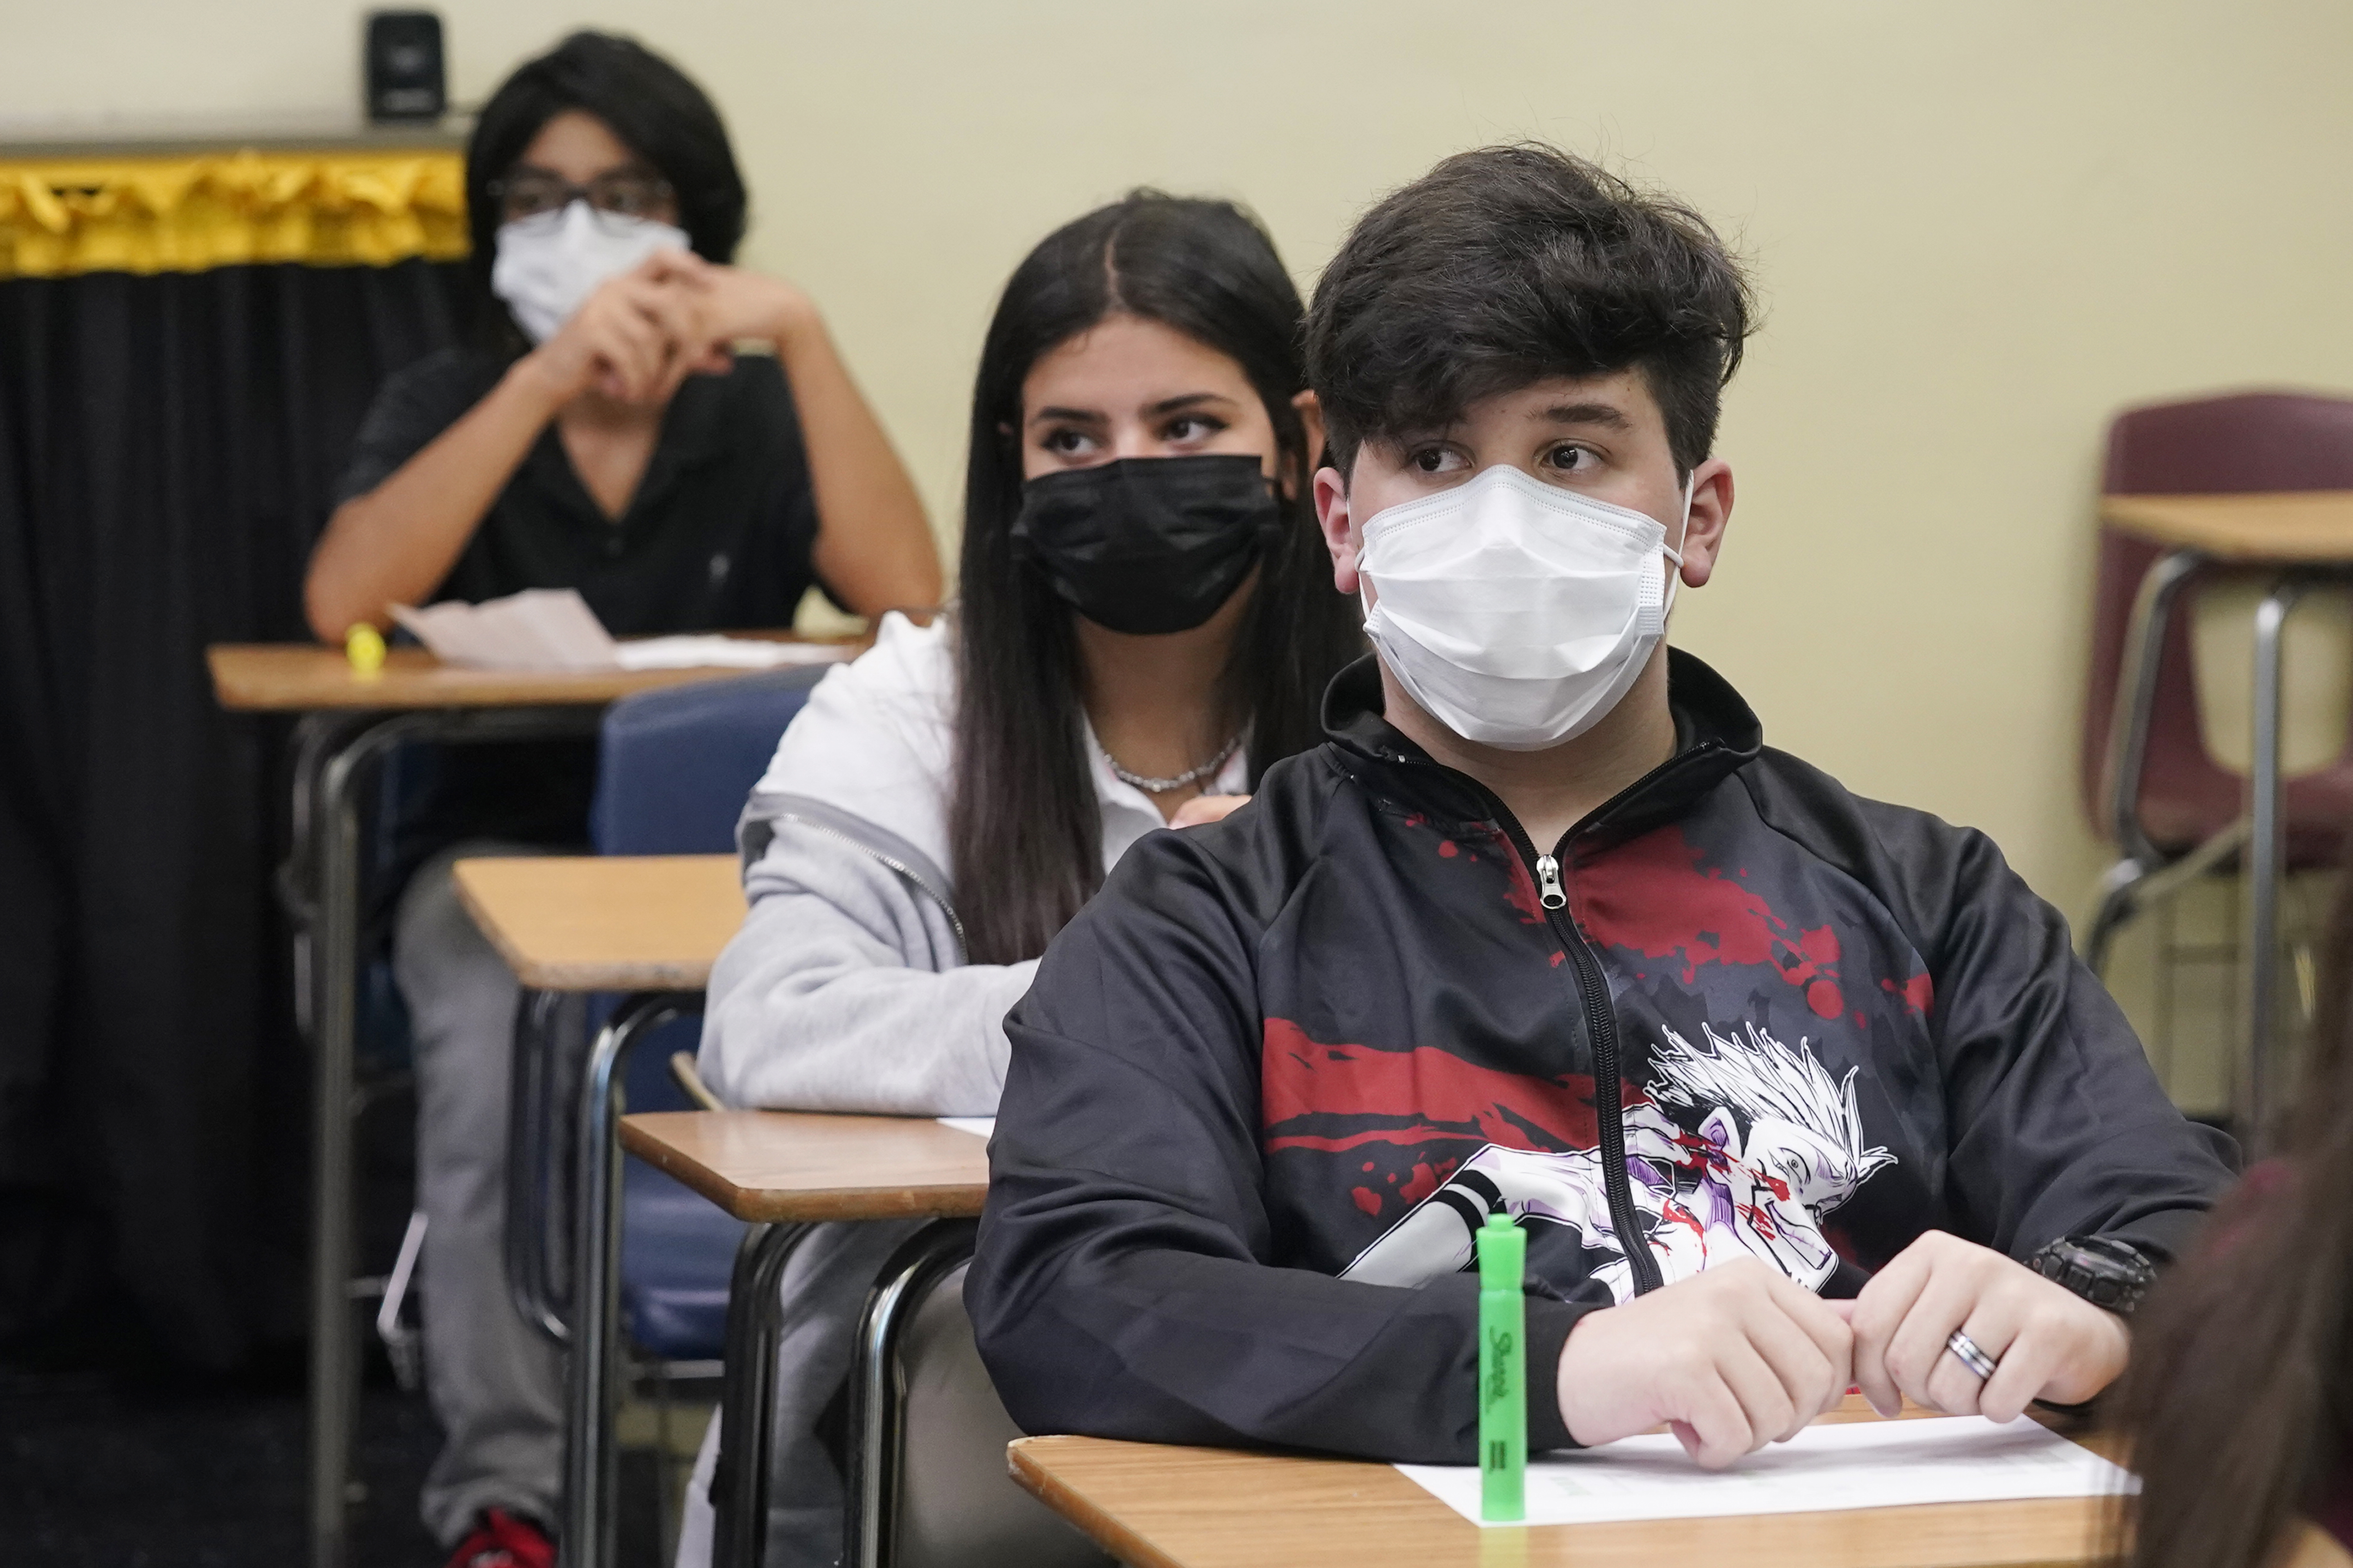 St. Tammany schools ask to drop mask mandate for students, teachers